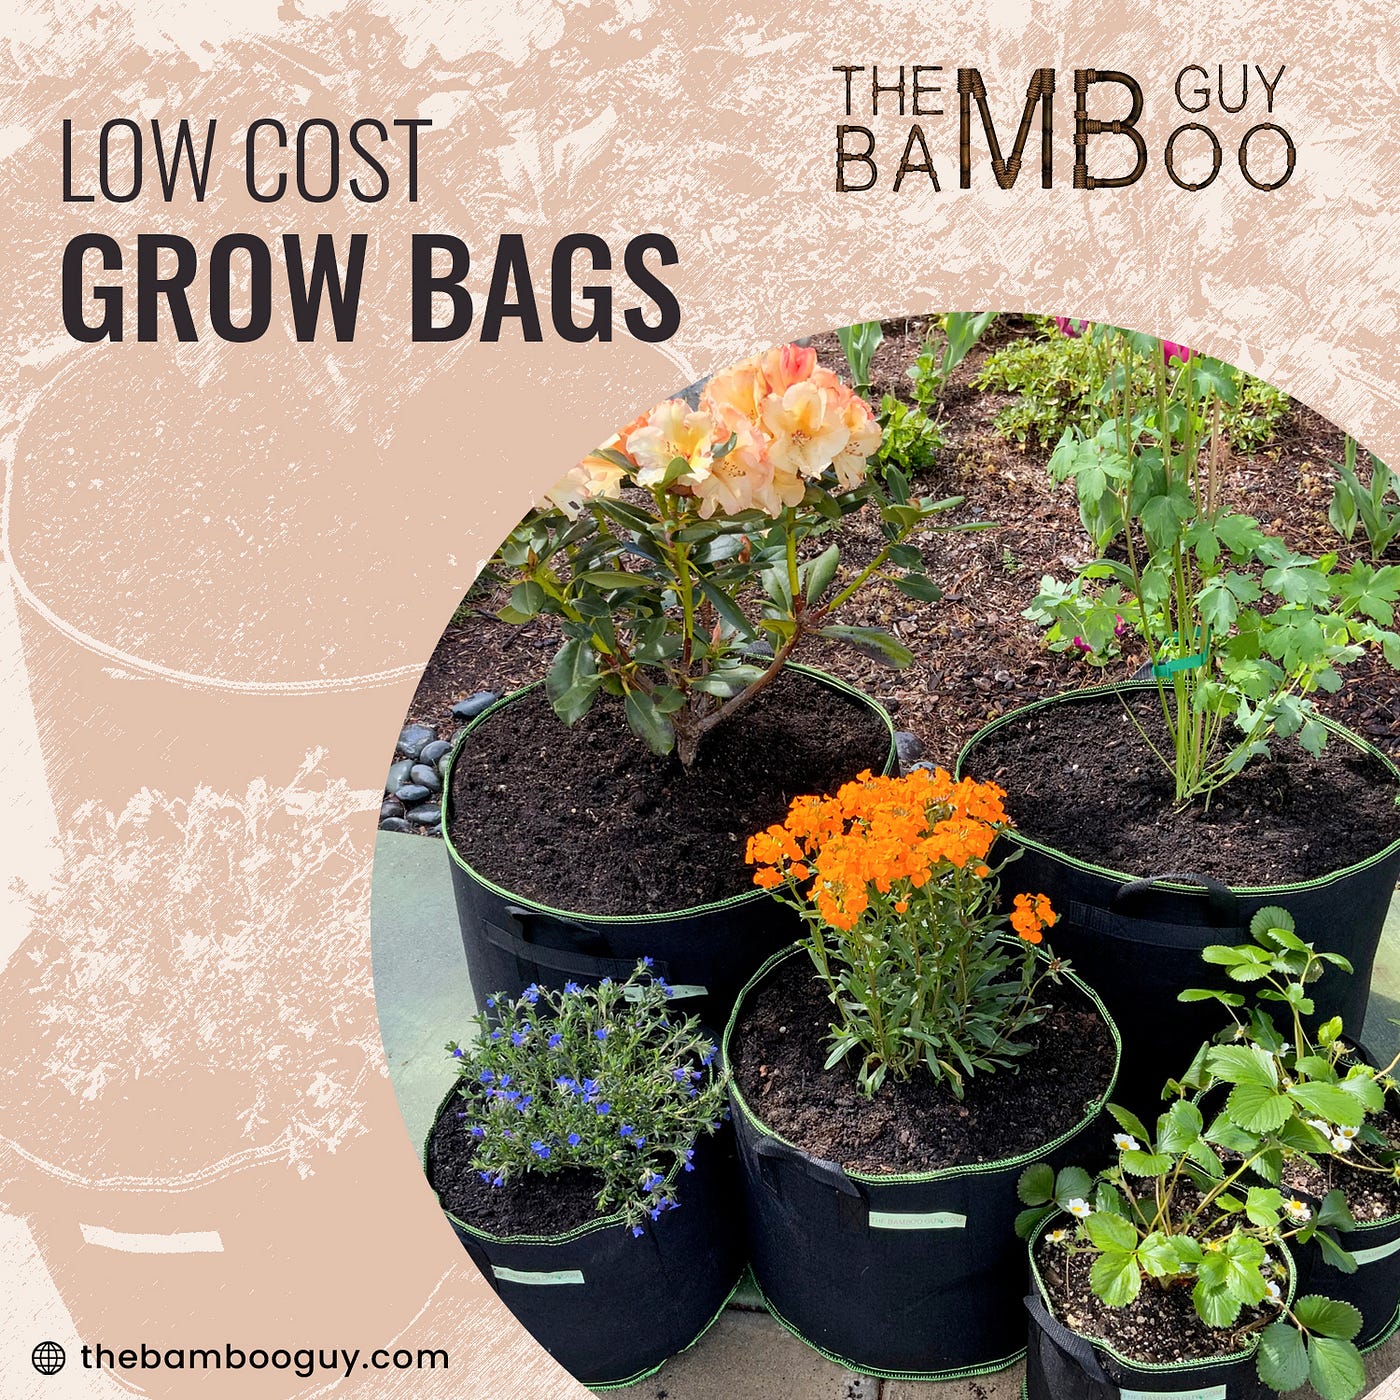 Low cost grow bags